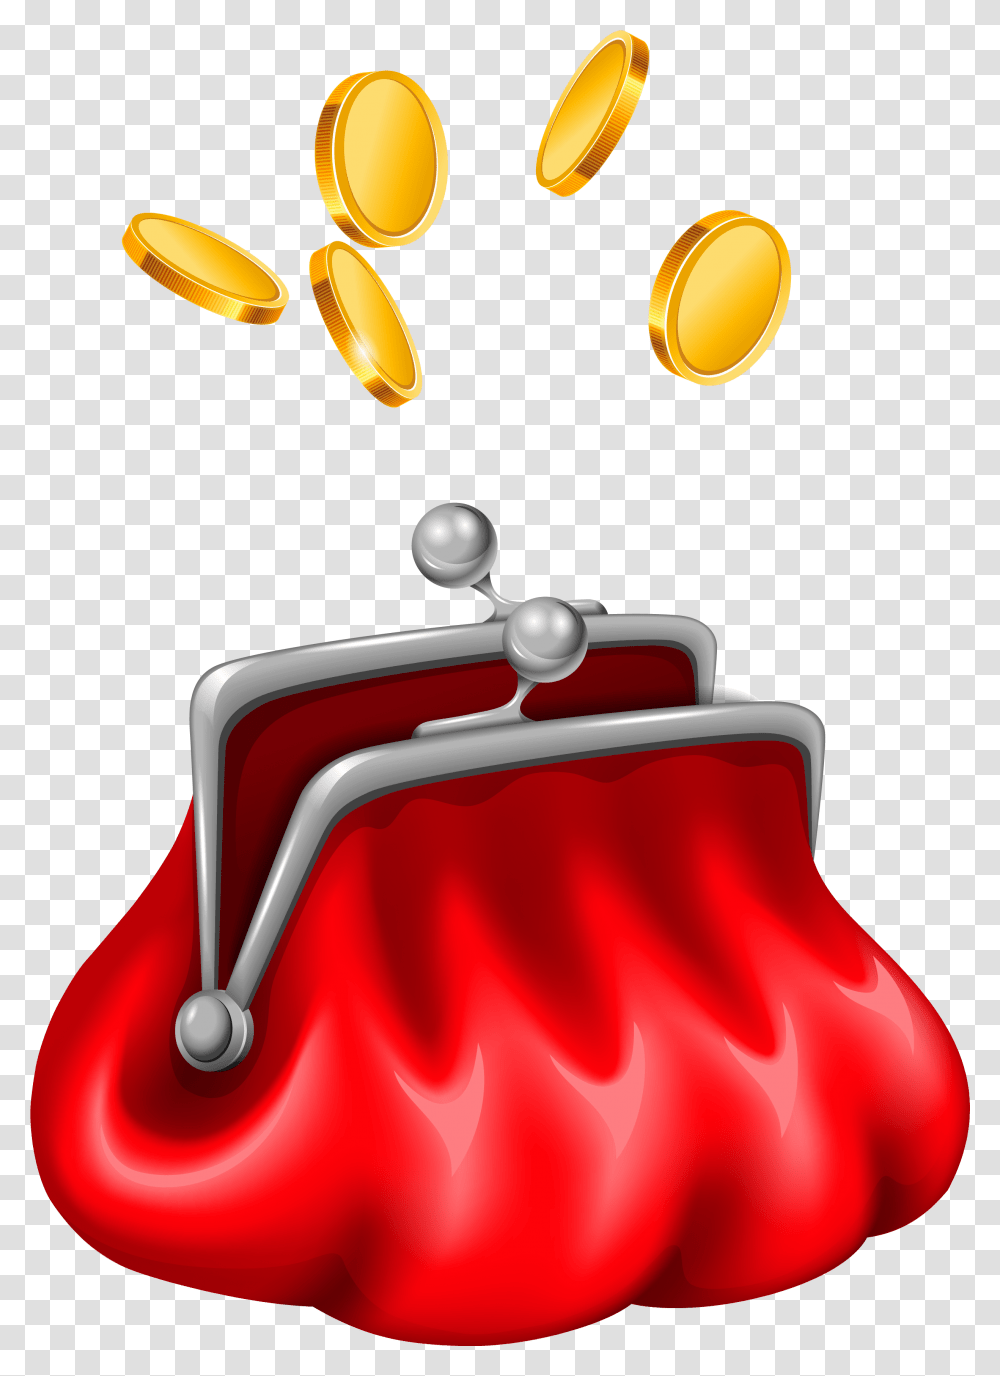 Purse With Coins Gallery Purse Clipart, Apparel, Bag, Cowbell Transparent Png